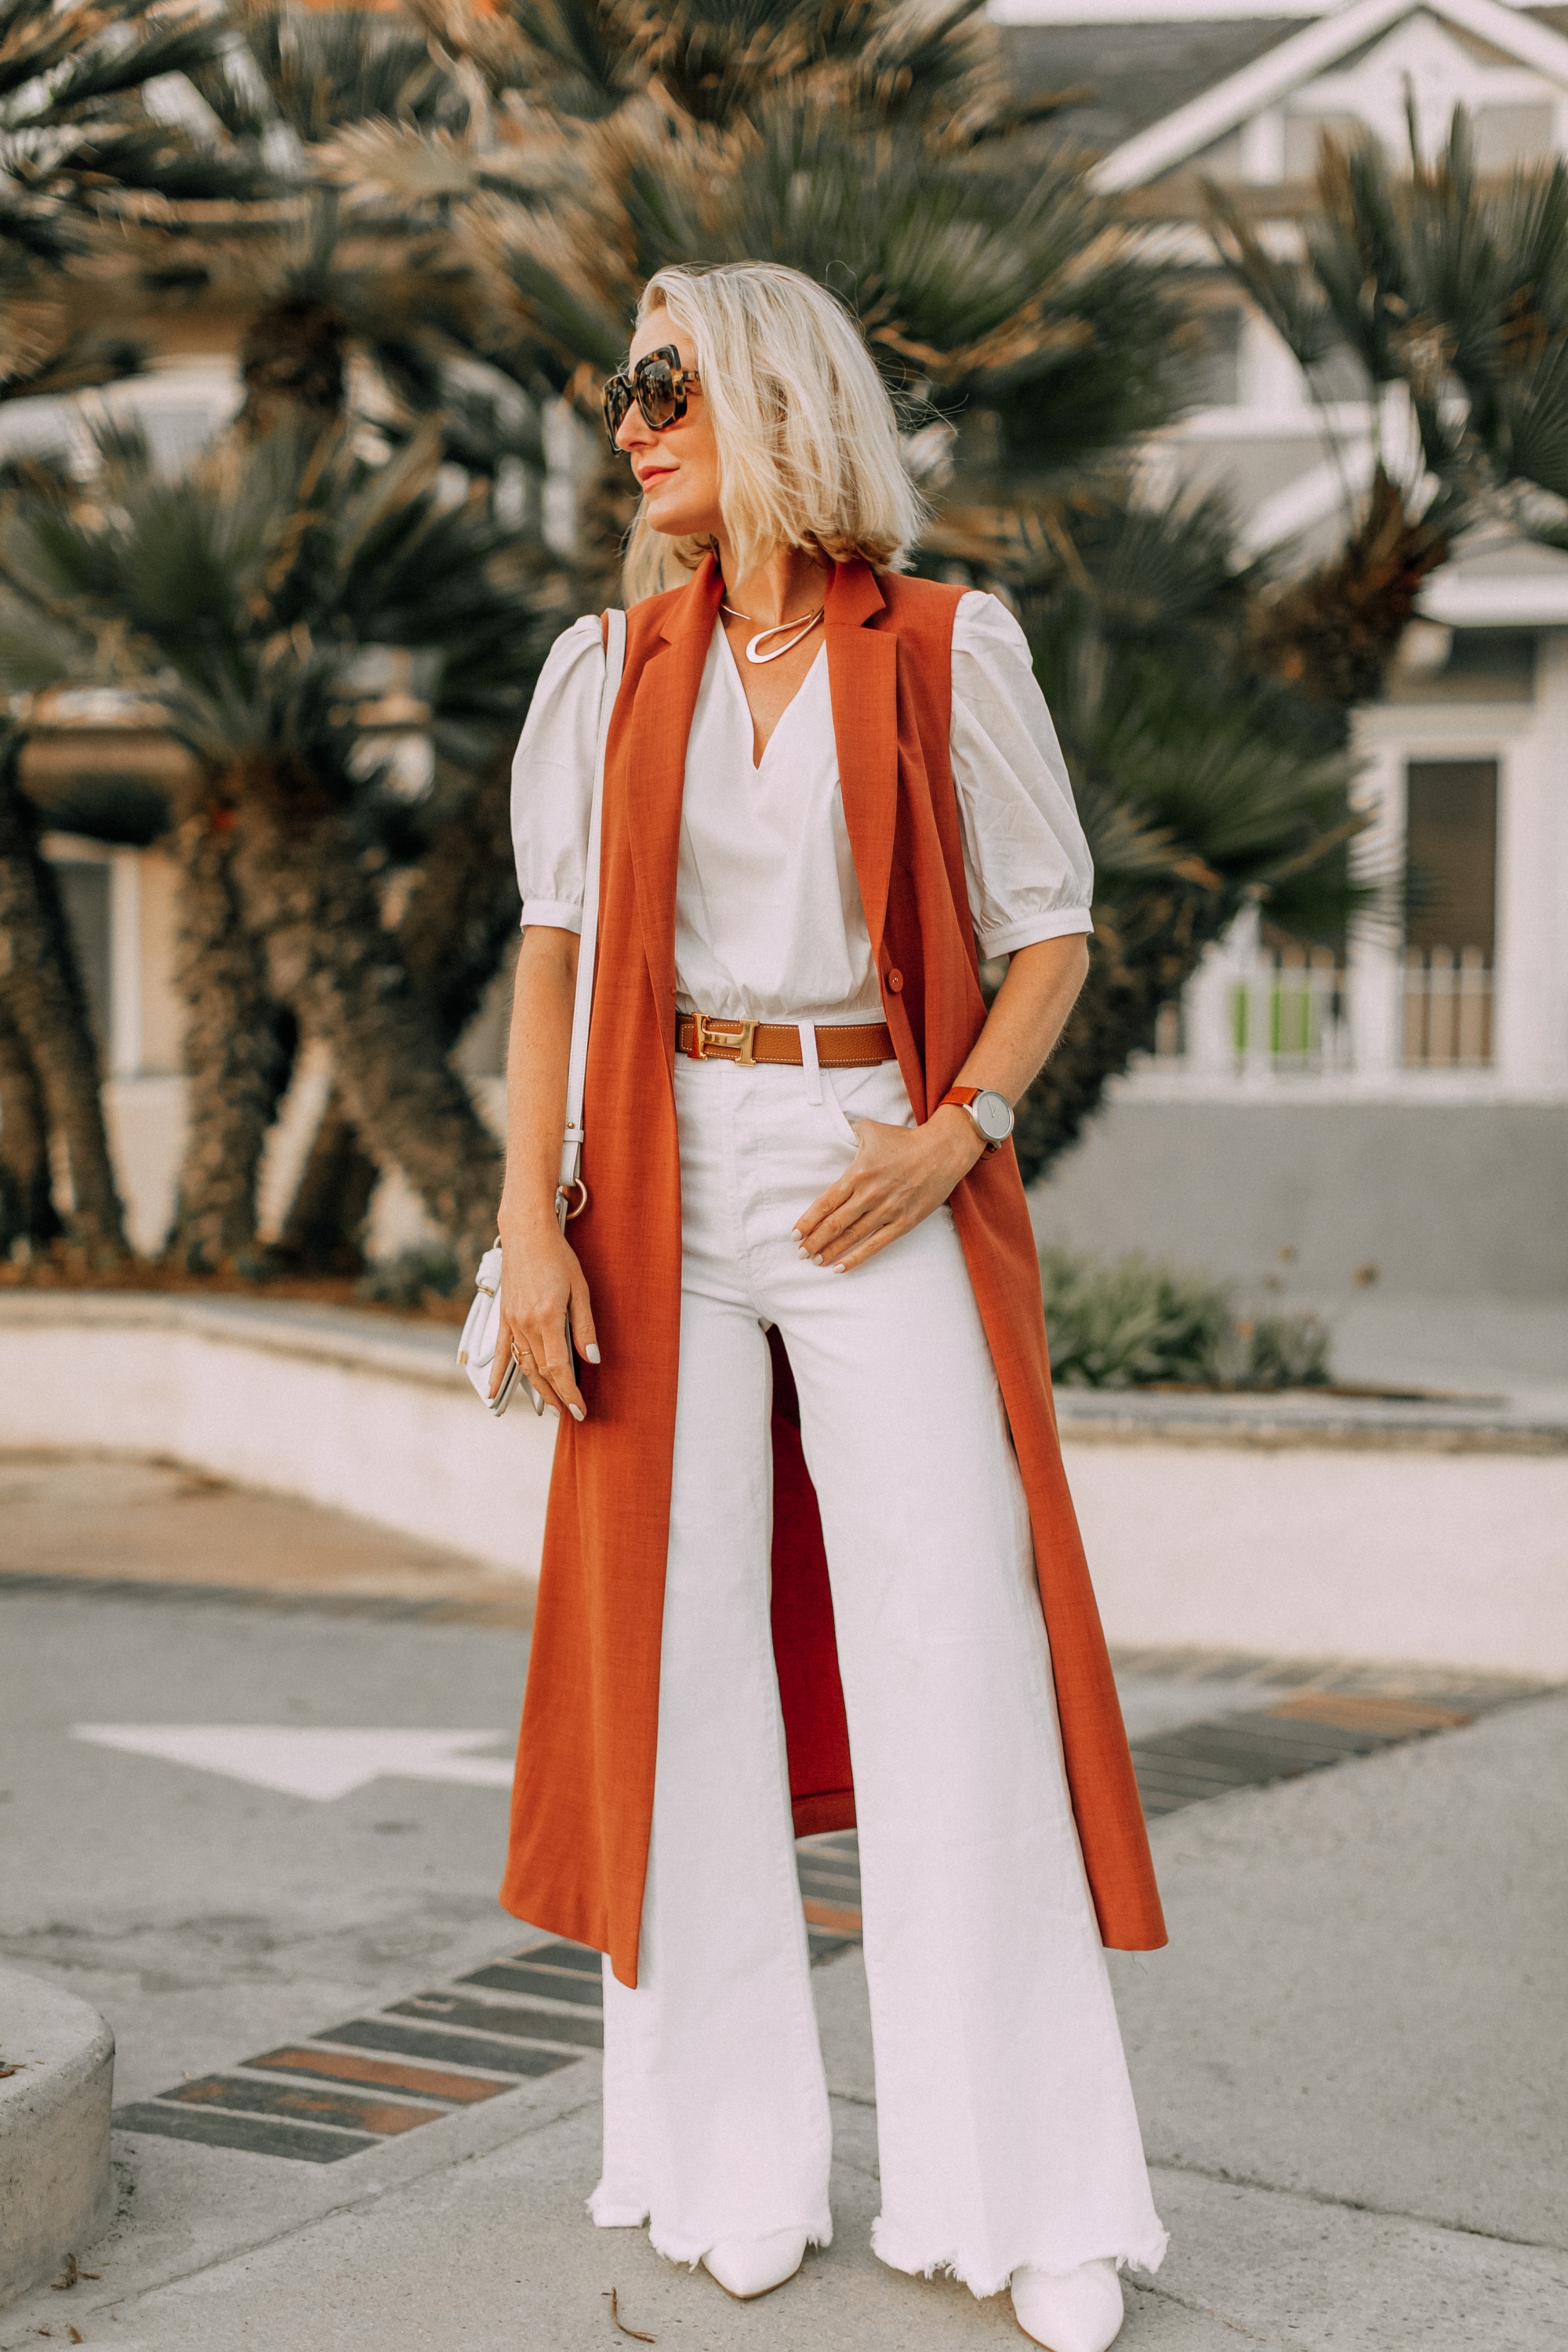 fashion blogger busbee style showing how to wear long vest with all white outfit and hermes belt